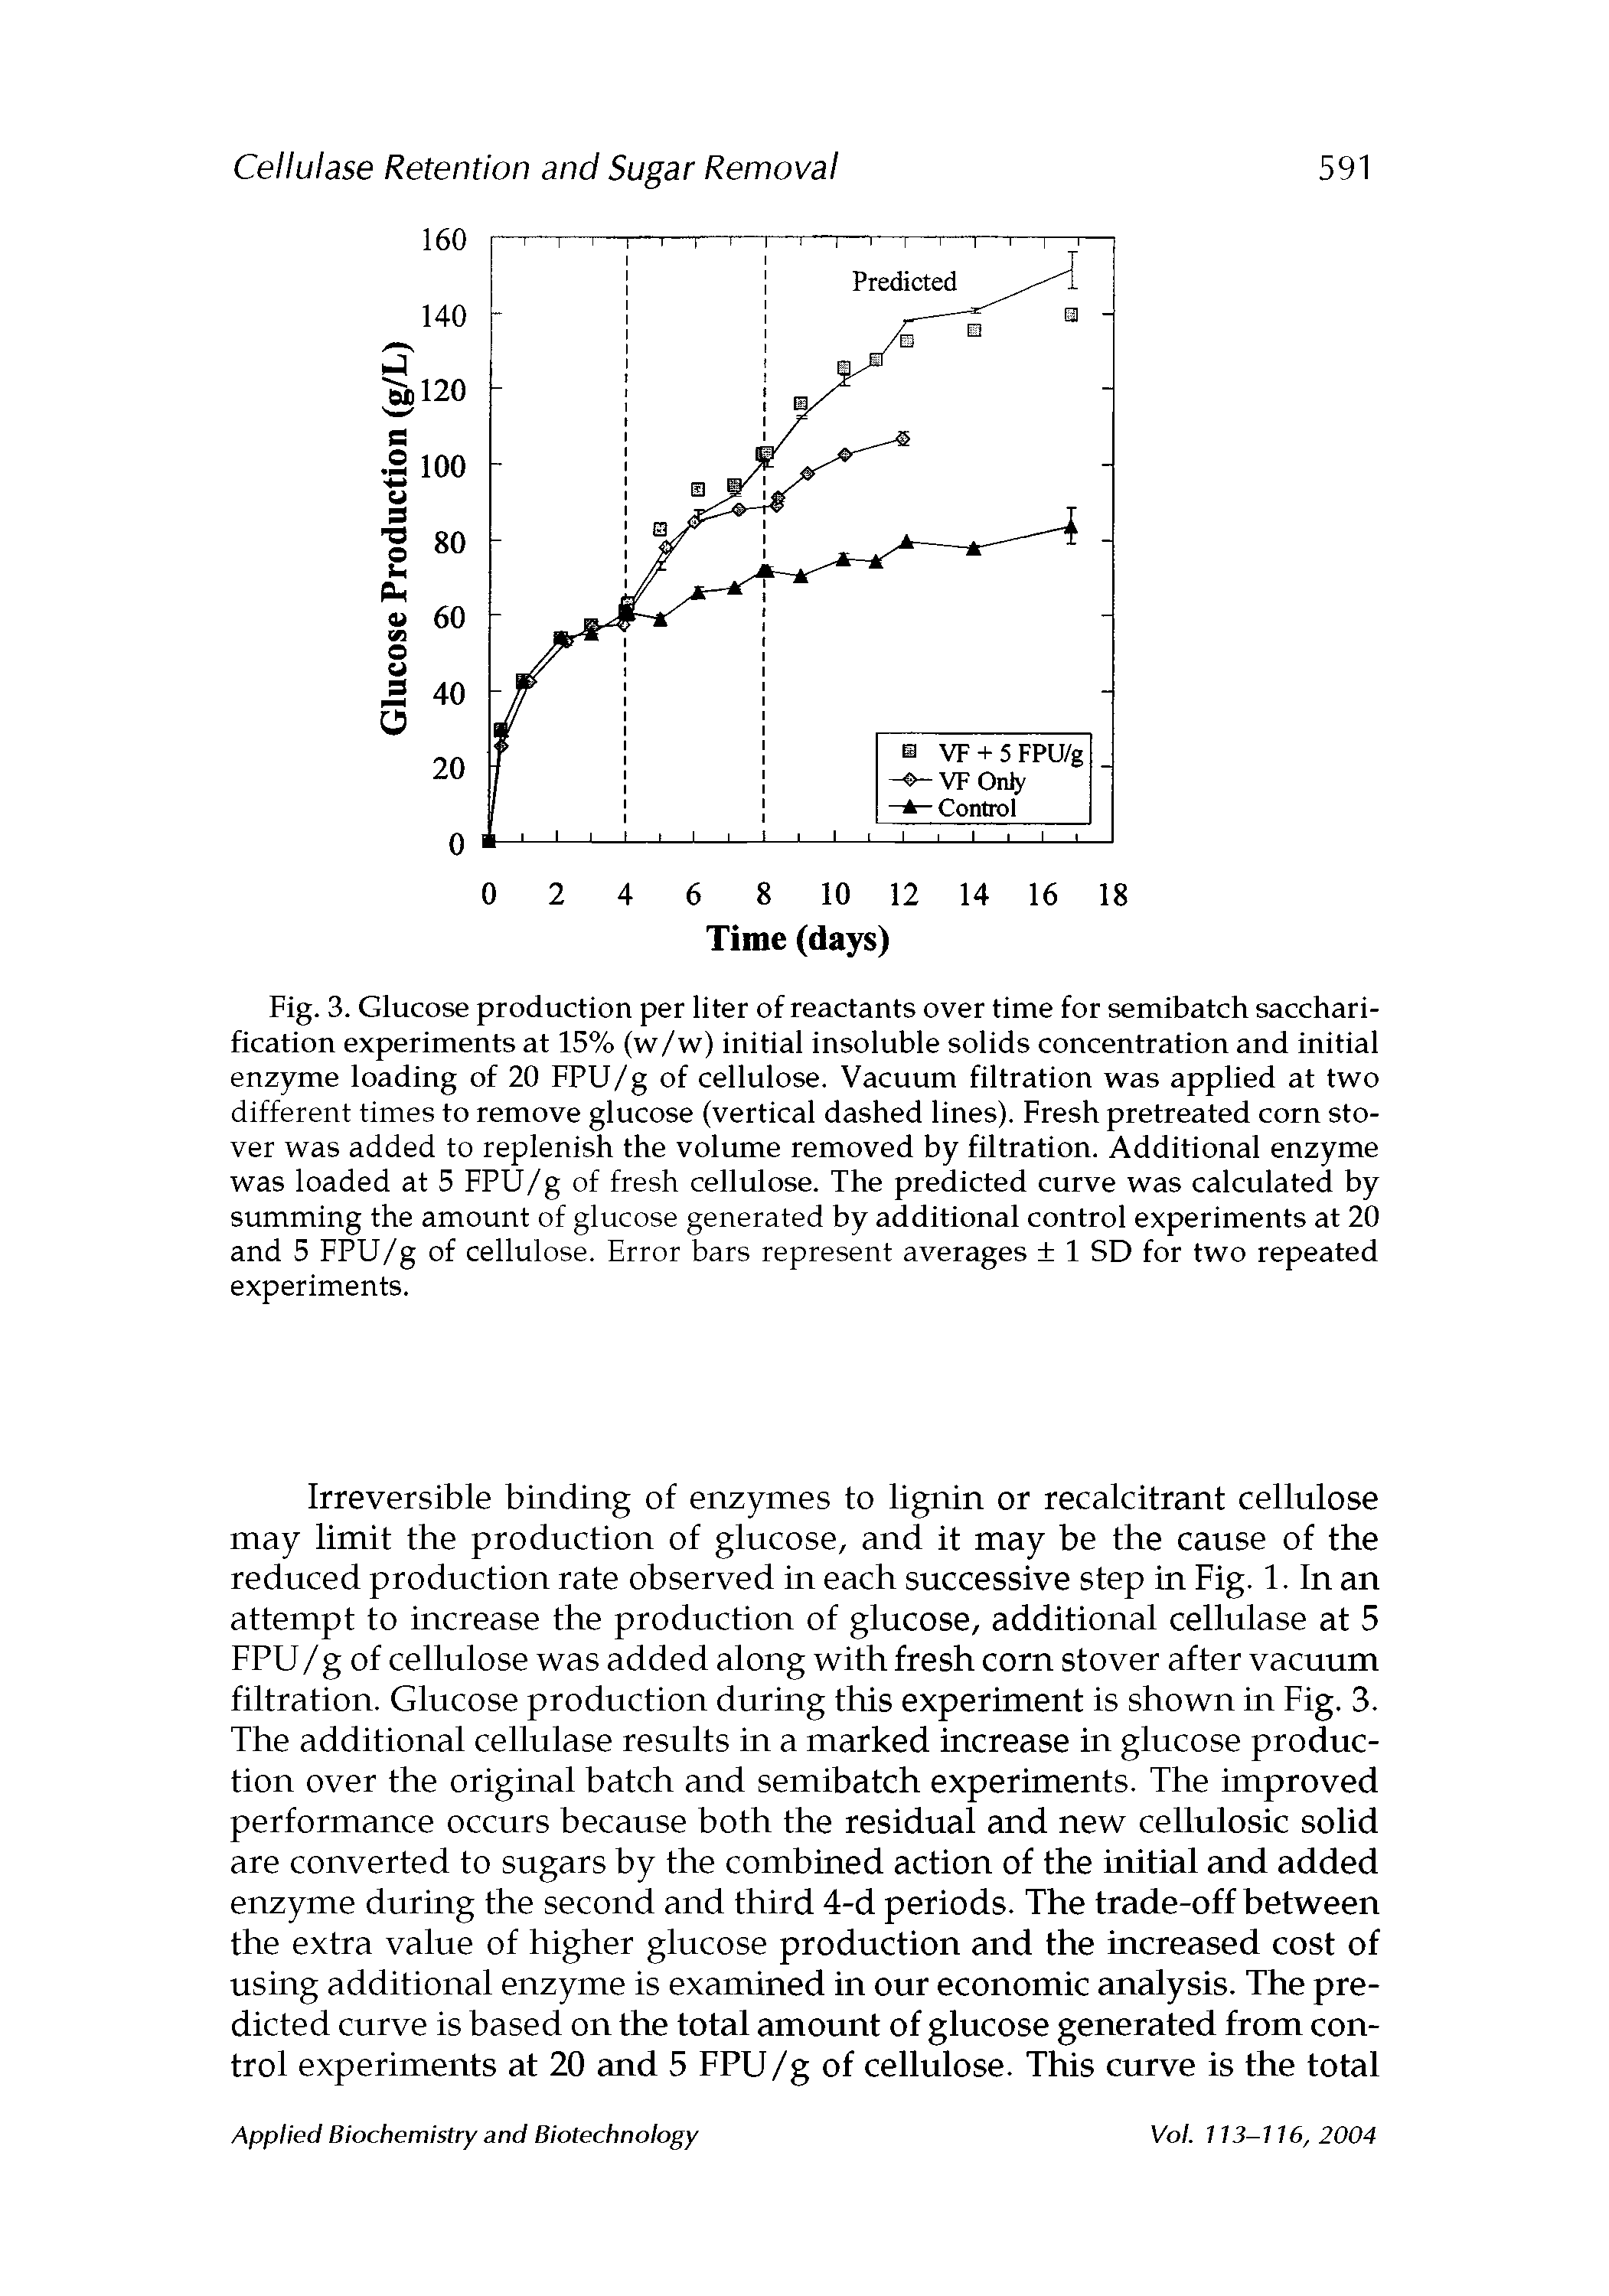 Fig. 3. Glucose production per liter of reactants over time for semibatch saccharification experiments at 15% (w/w) initial insoluble solids concentration and initial enzyme loading of 20 FPU/g of cellulose. Vacuum filtration was applied at two different times to remove glucose (vertical dashed lines). Fresh pretreated corn stover was added to replenish the volume removed by filtration. Additional enzyme was loaded at 5 FPU/g of fresh cellulose. The predicted curve was calculated by summing the amount of glucose generated by additional control experiments at 20 and 5 FPU/g of cellulose. Error bars represent averages 1 SD for two repeated experiments.